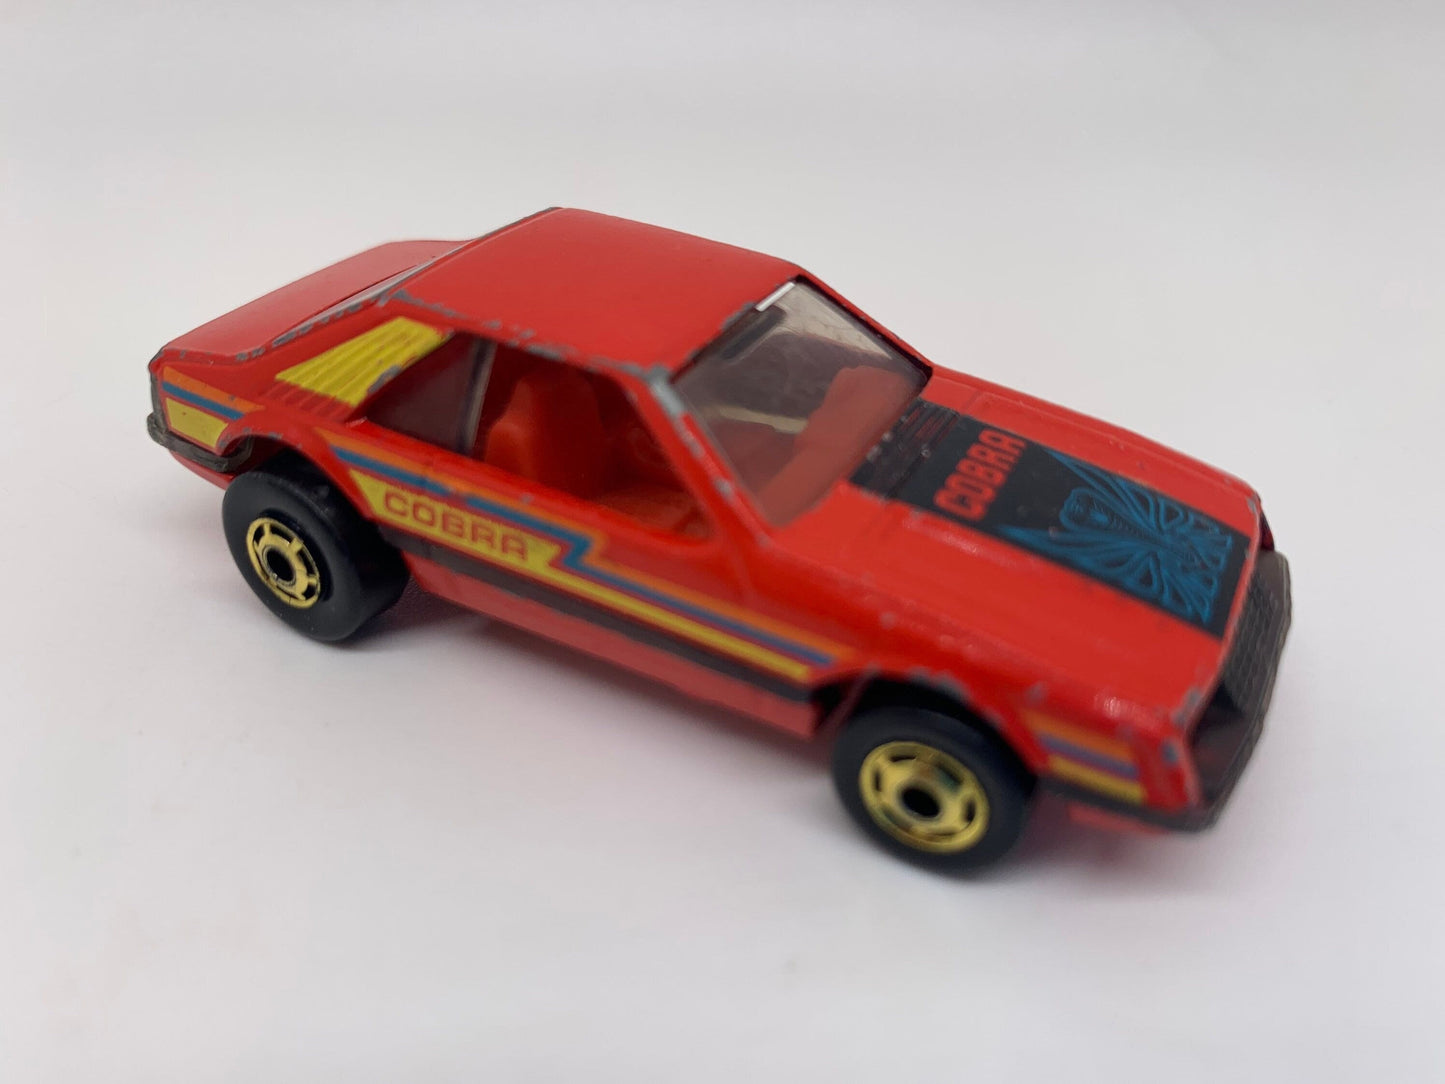 Hot Wheels Turbo Mustang Enamel Red Cobra Stunt Miniature Collectable Scale Model Toy Car